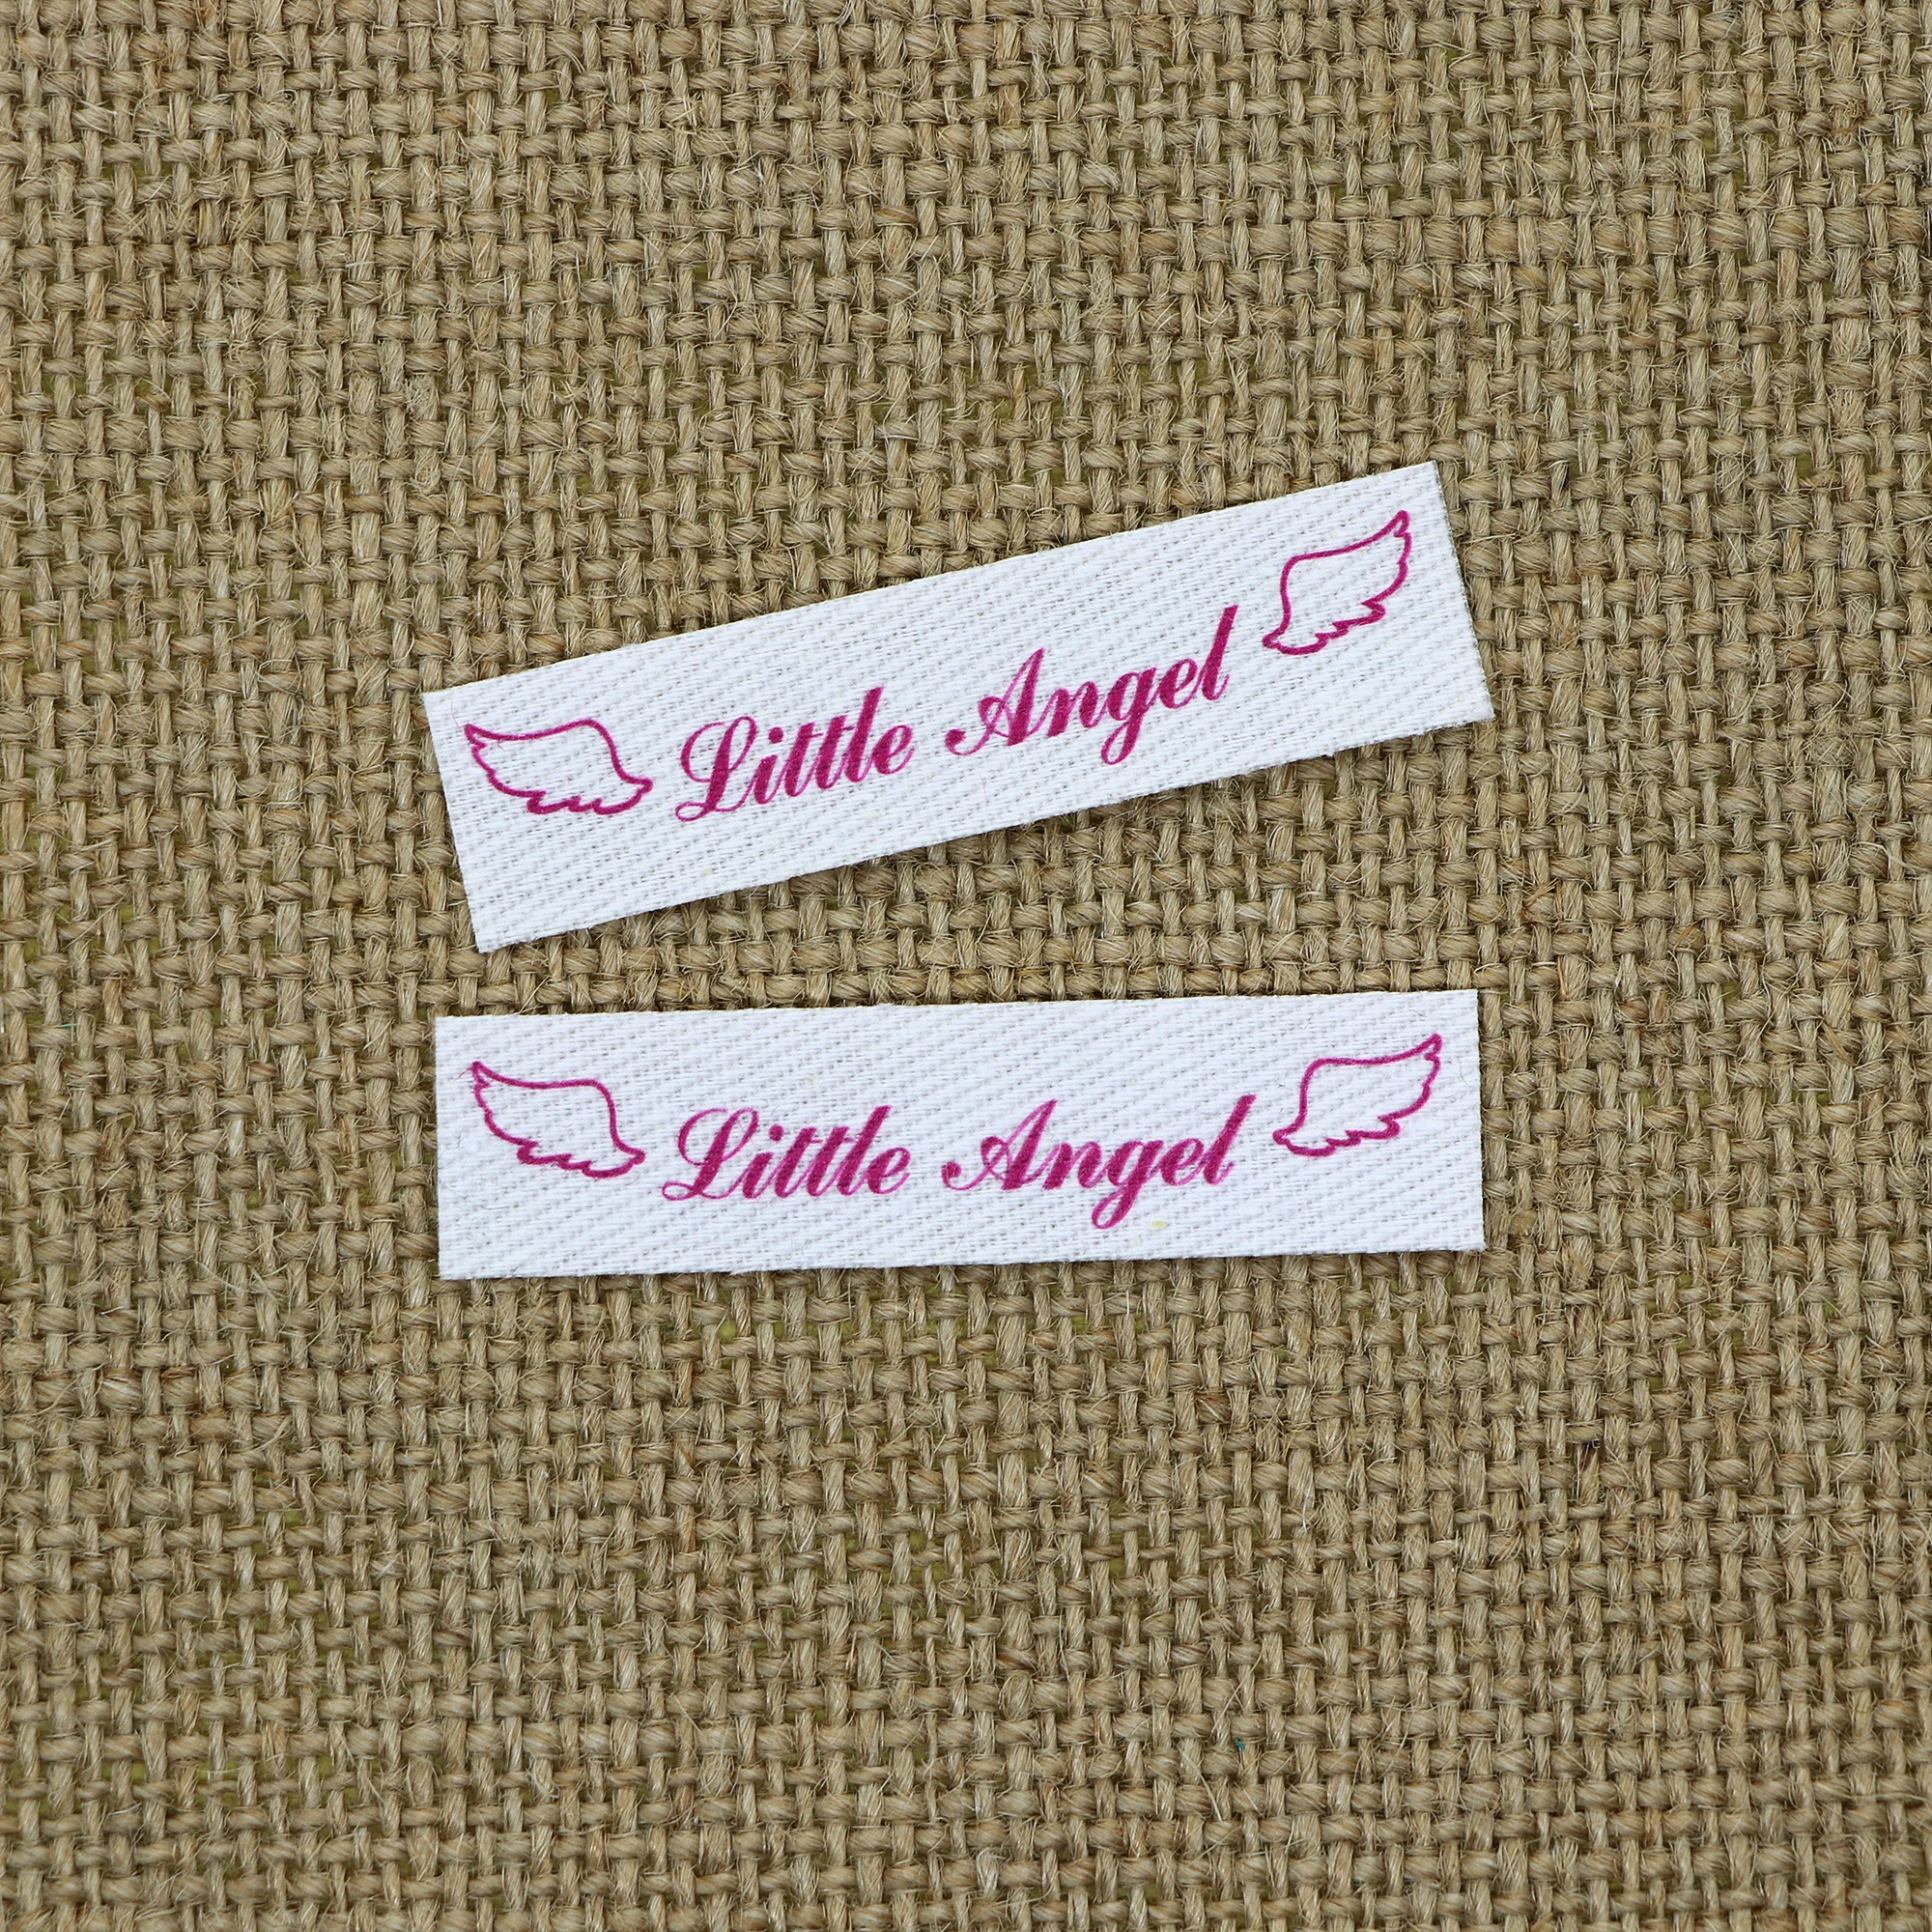 20x50mm Iron On Labels,Cotton With Logo or Text Sewing Label,tags for  knitted things,Custom